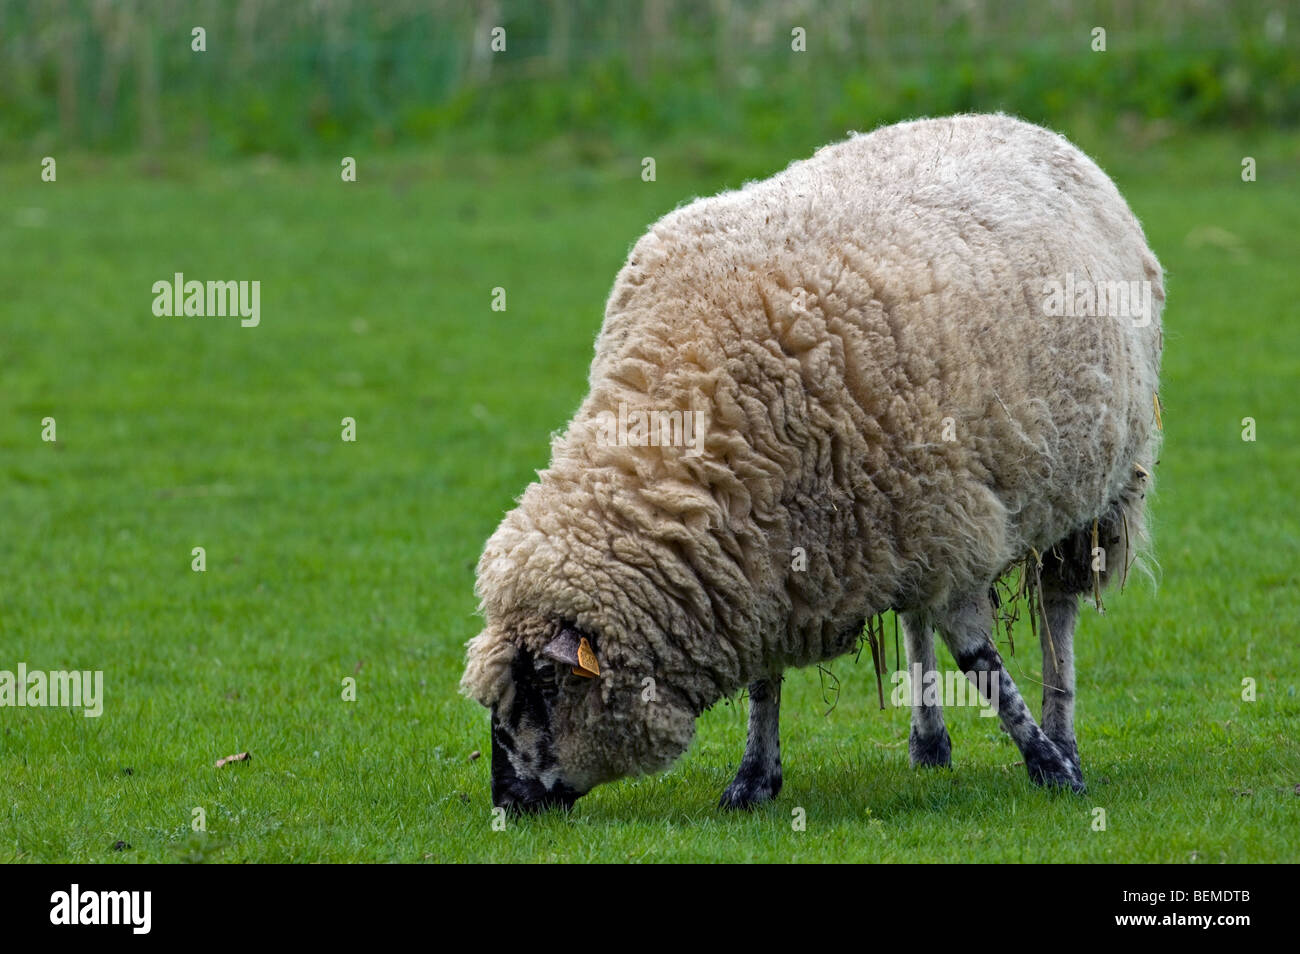 The Belgian breed of sheep Entre Sambre et Meuse (Ovis aries) grazing in meadow, Belgium Stock Photo